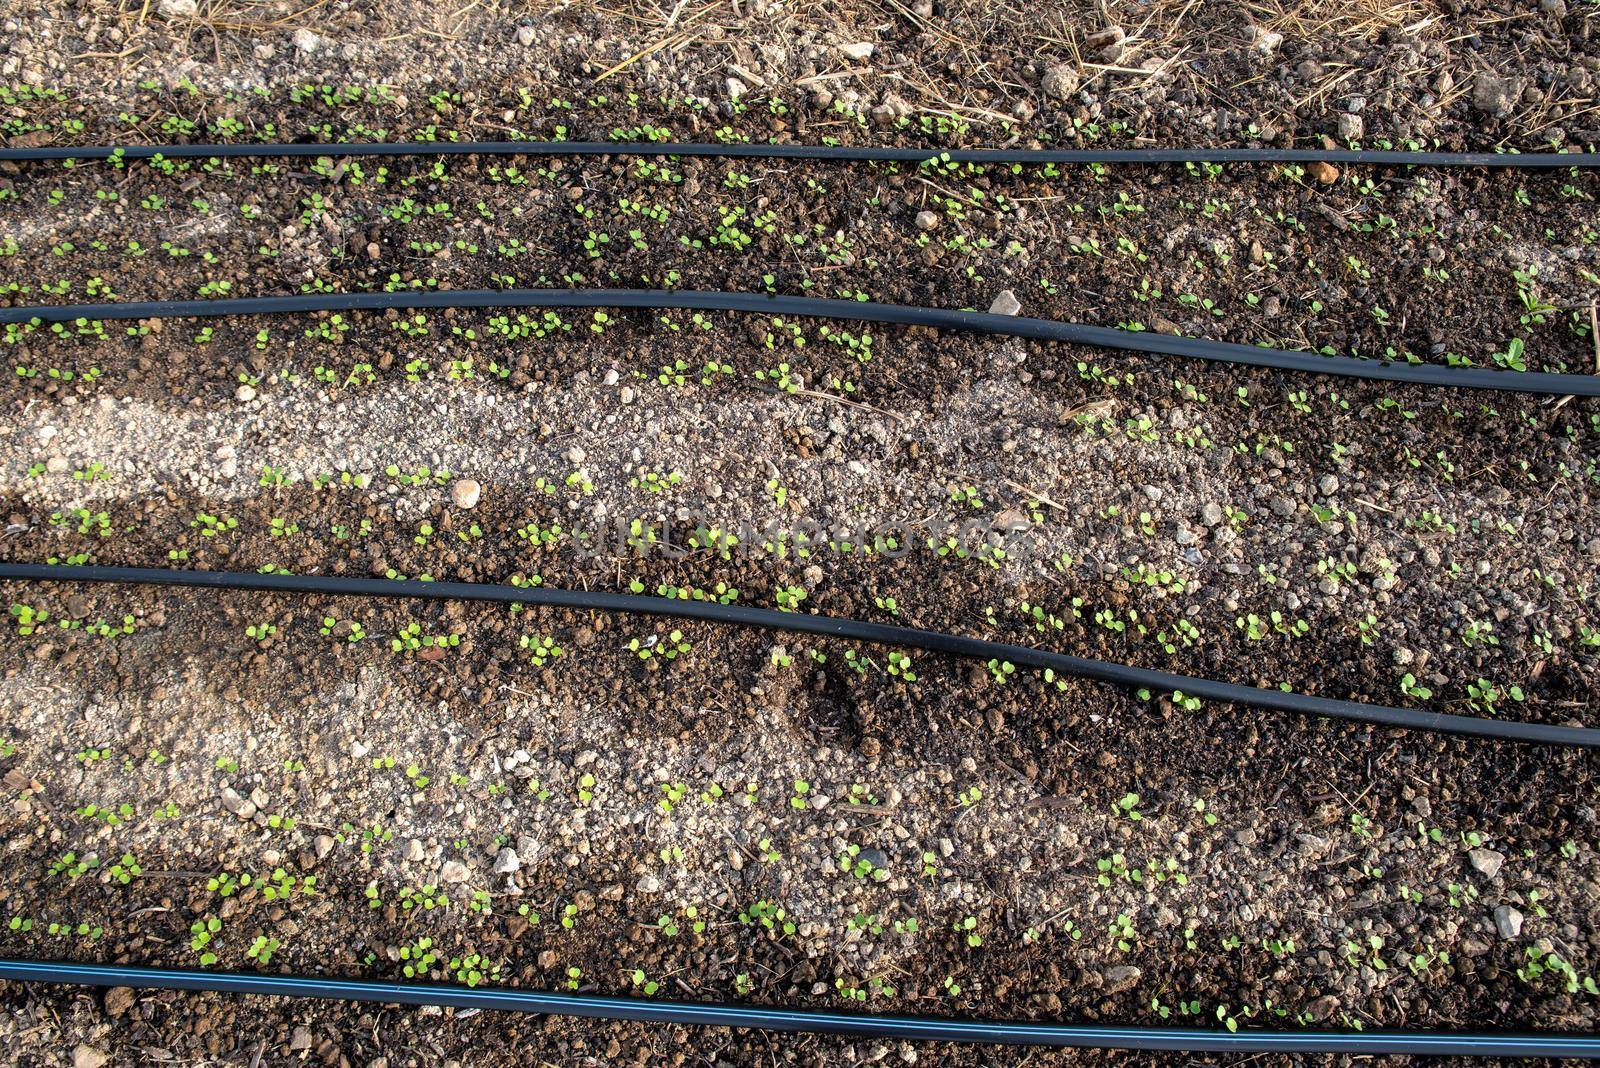 Tiny green seedlings sprout in the dark damp spoil around irrigation lines in vegetable garden.